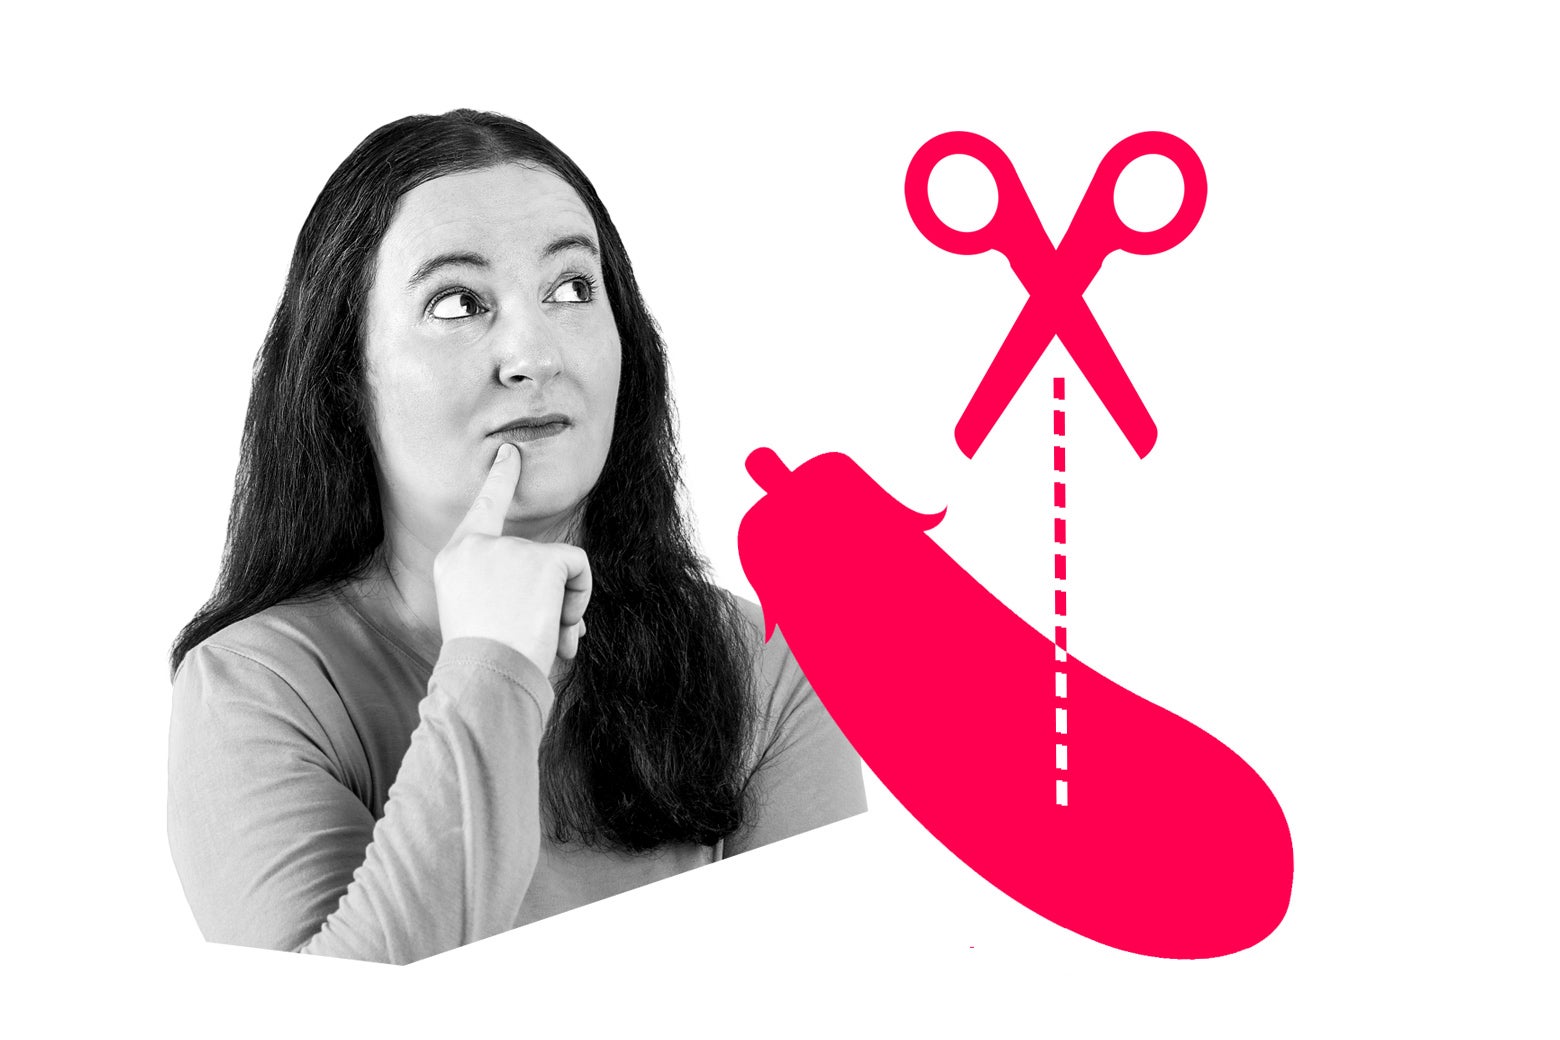 A woman looks quizzically at an illustration of an eggplant and scissors.